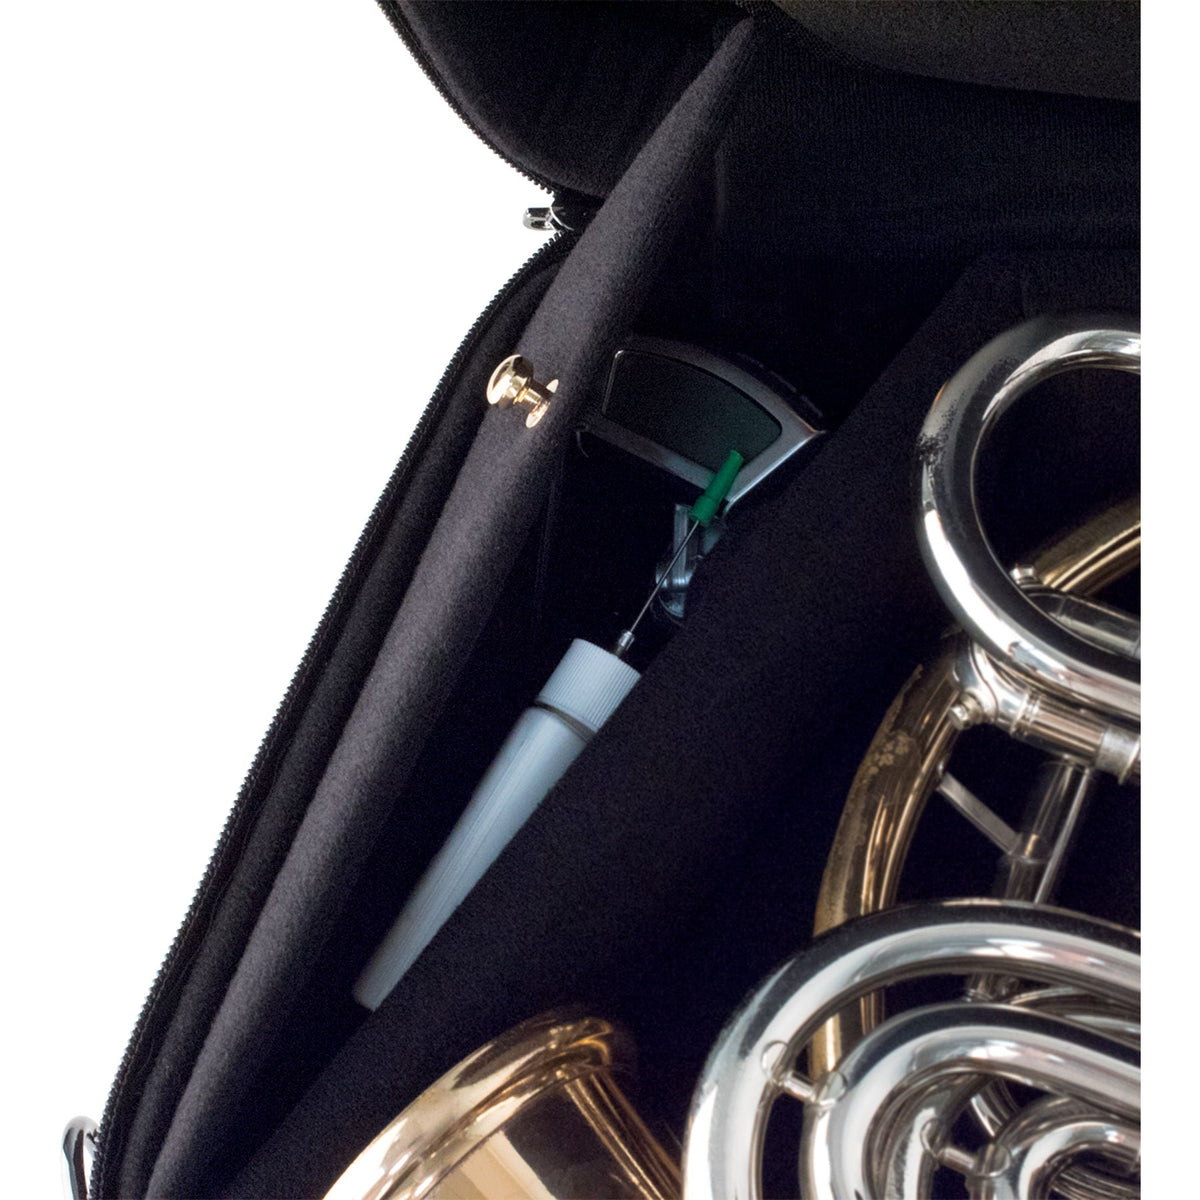 Protec - French Horn Screw Bell IPAC Case (Compact)-Case-Protec-Music Elements